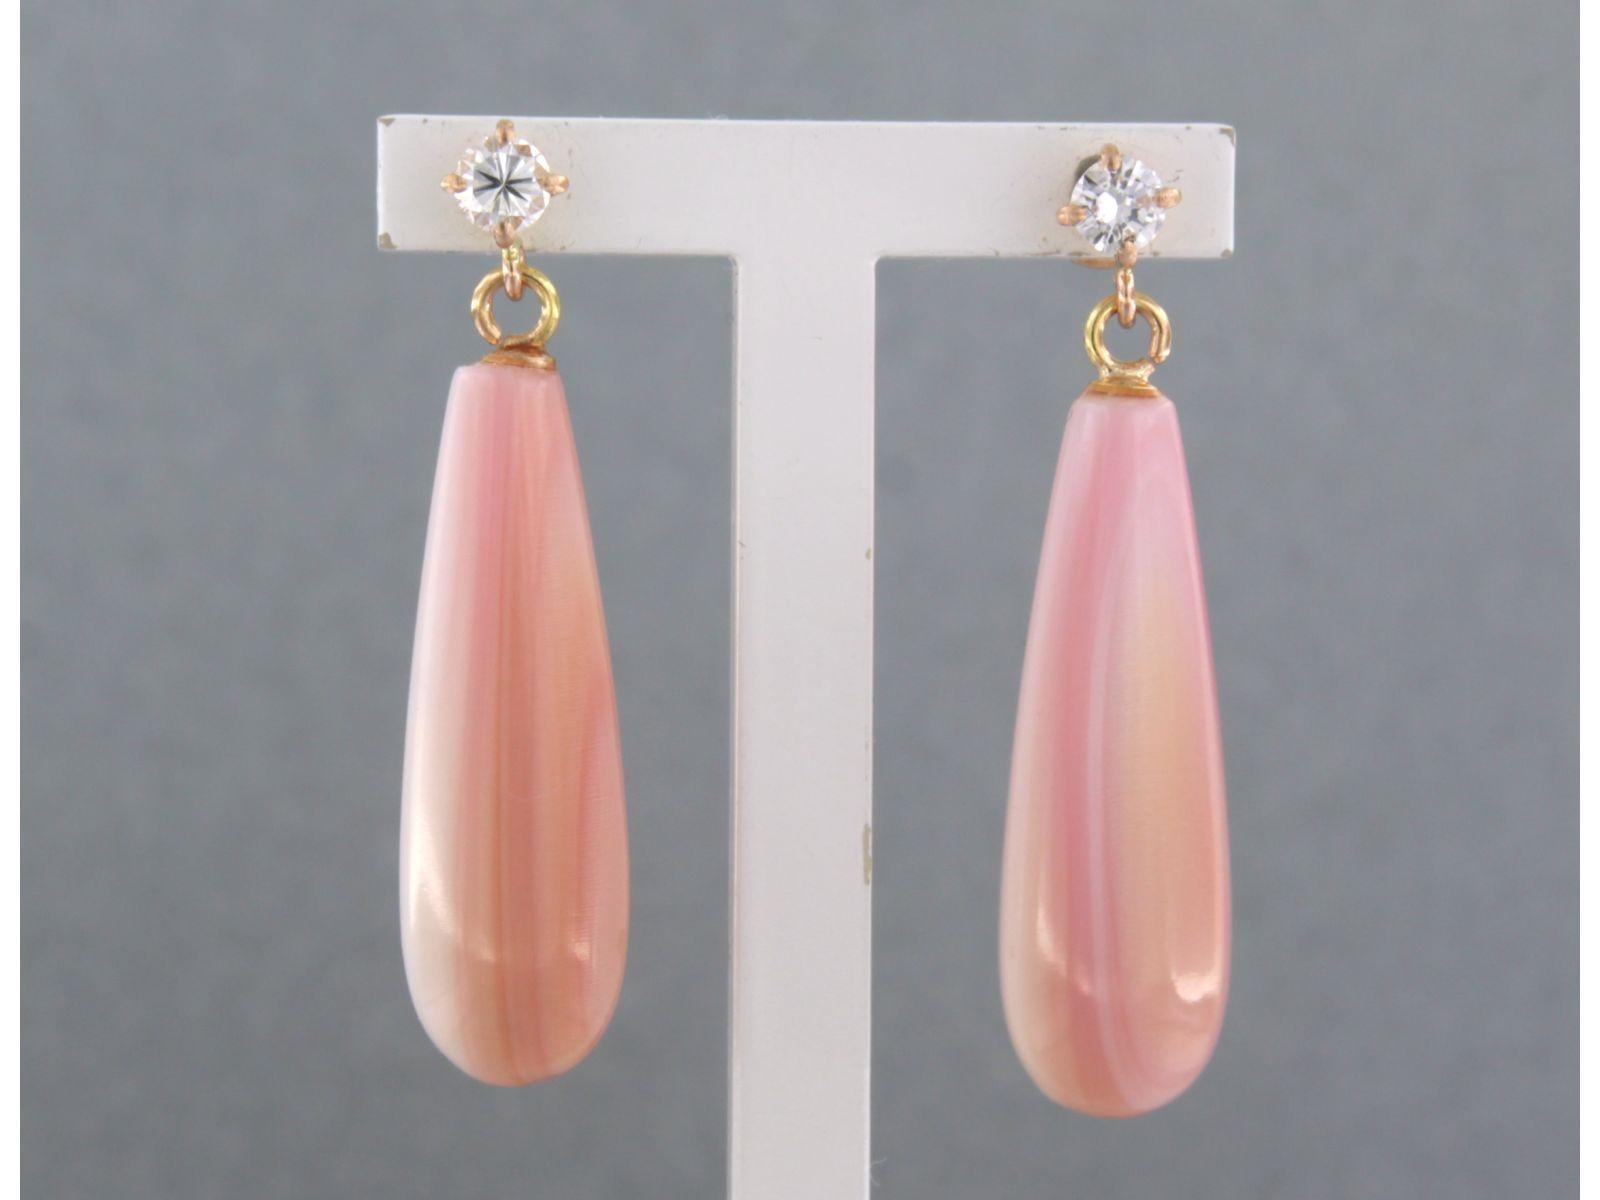 18k pink gold earrings set with agate and brilliant cut diamonds. 0.30ct - G/H - VS/SI

Detailed description:

the size of the earring is 3.3 cm long by 8.0 mm wide

weight 6.5 grams

occupied with

- 2 x 2.5 cm x 8.2 mm drop of cabachon cut